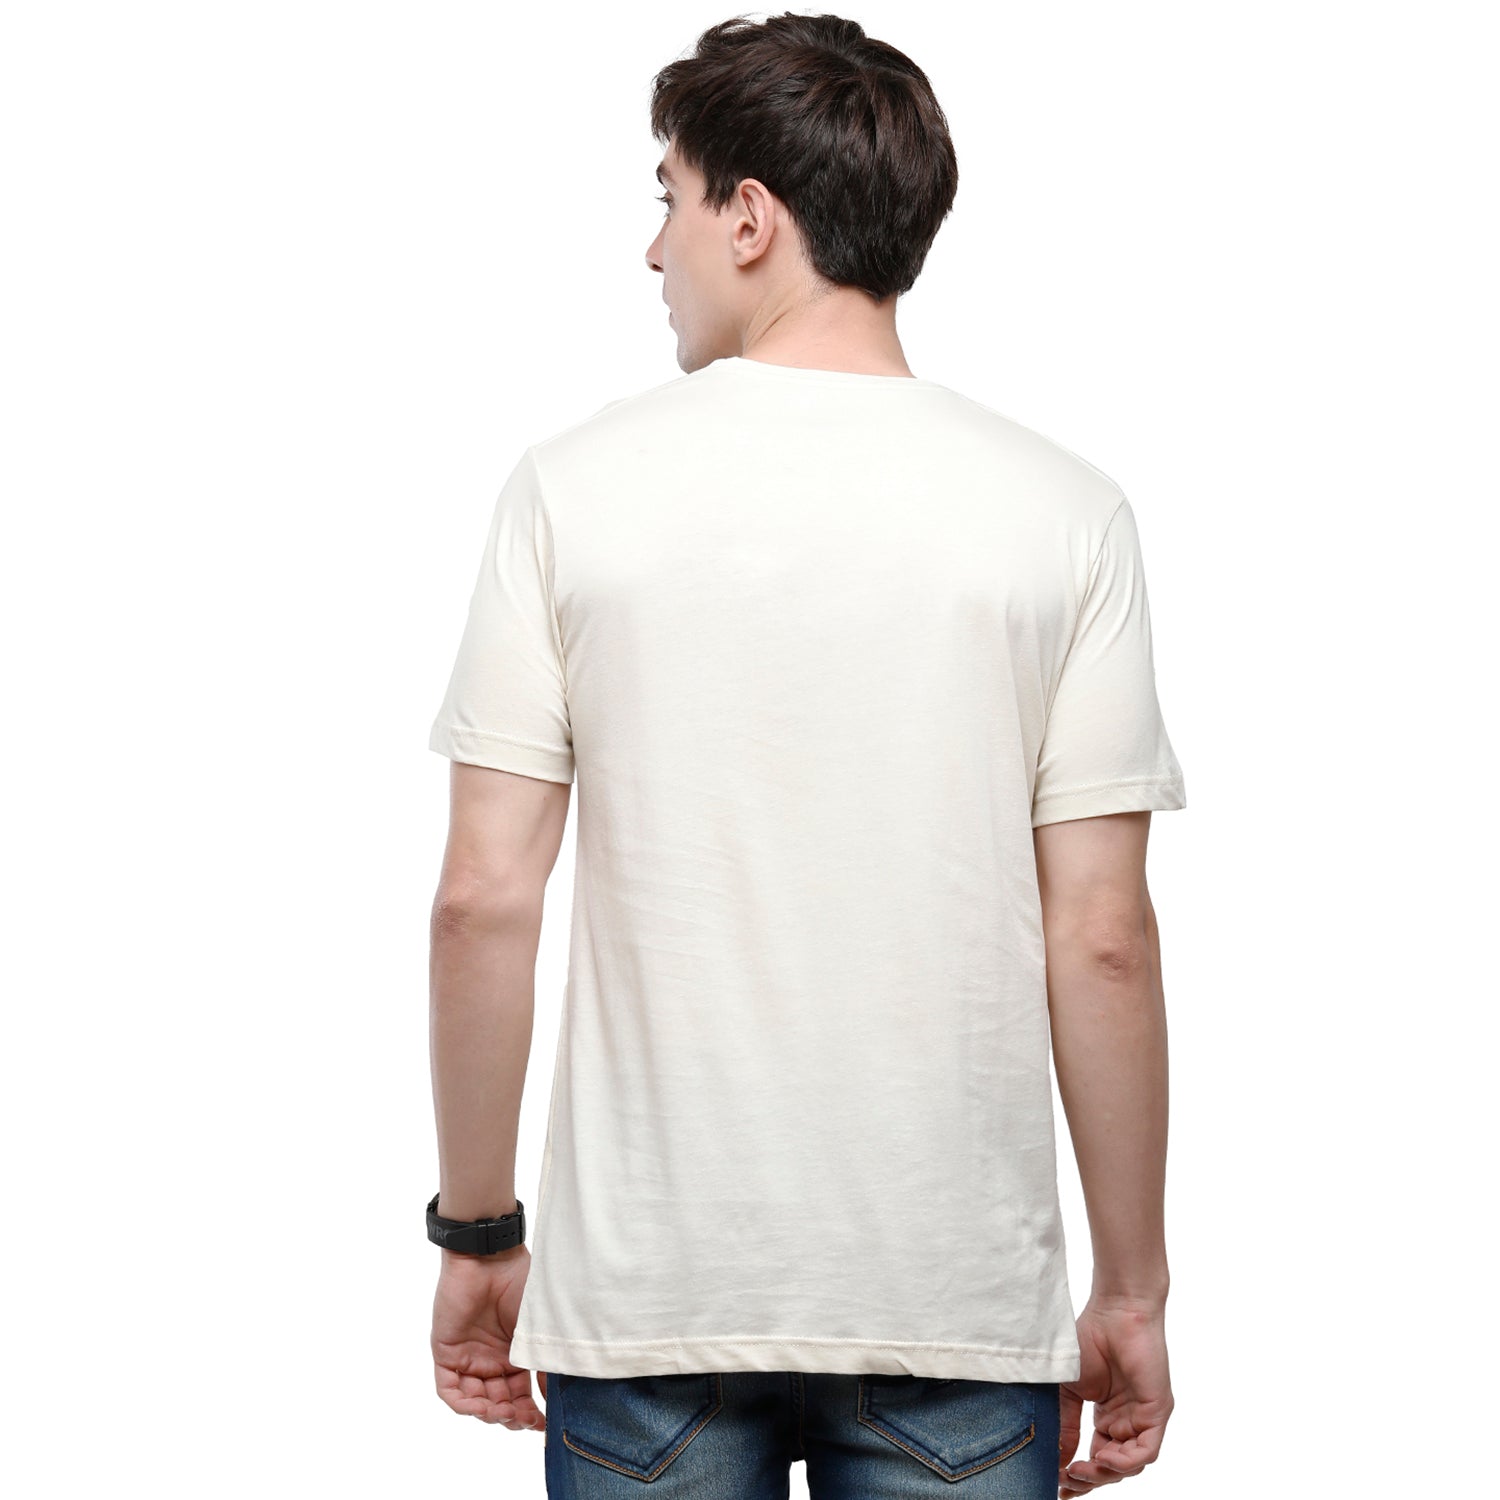 Classic Polo Men's Solid Single Jersey White Half Sleeve Slim Fit T-Shirt - Kore-02 T-shirt Classic Polo 